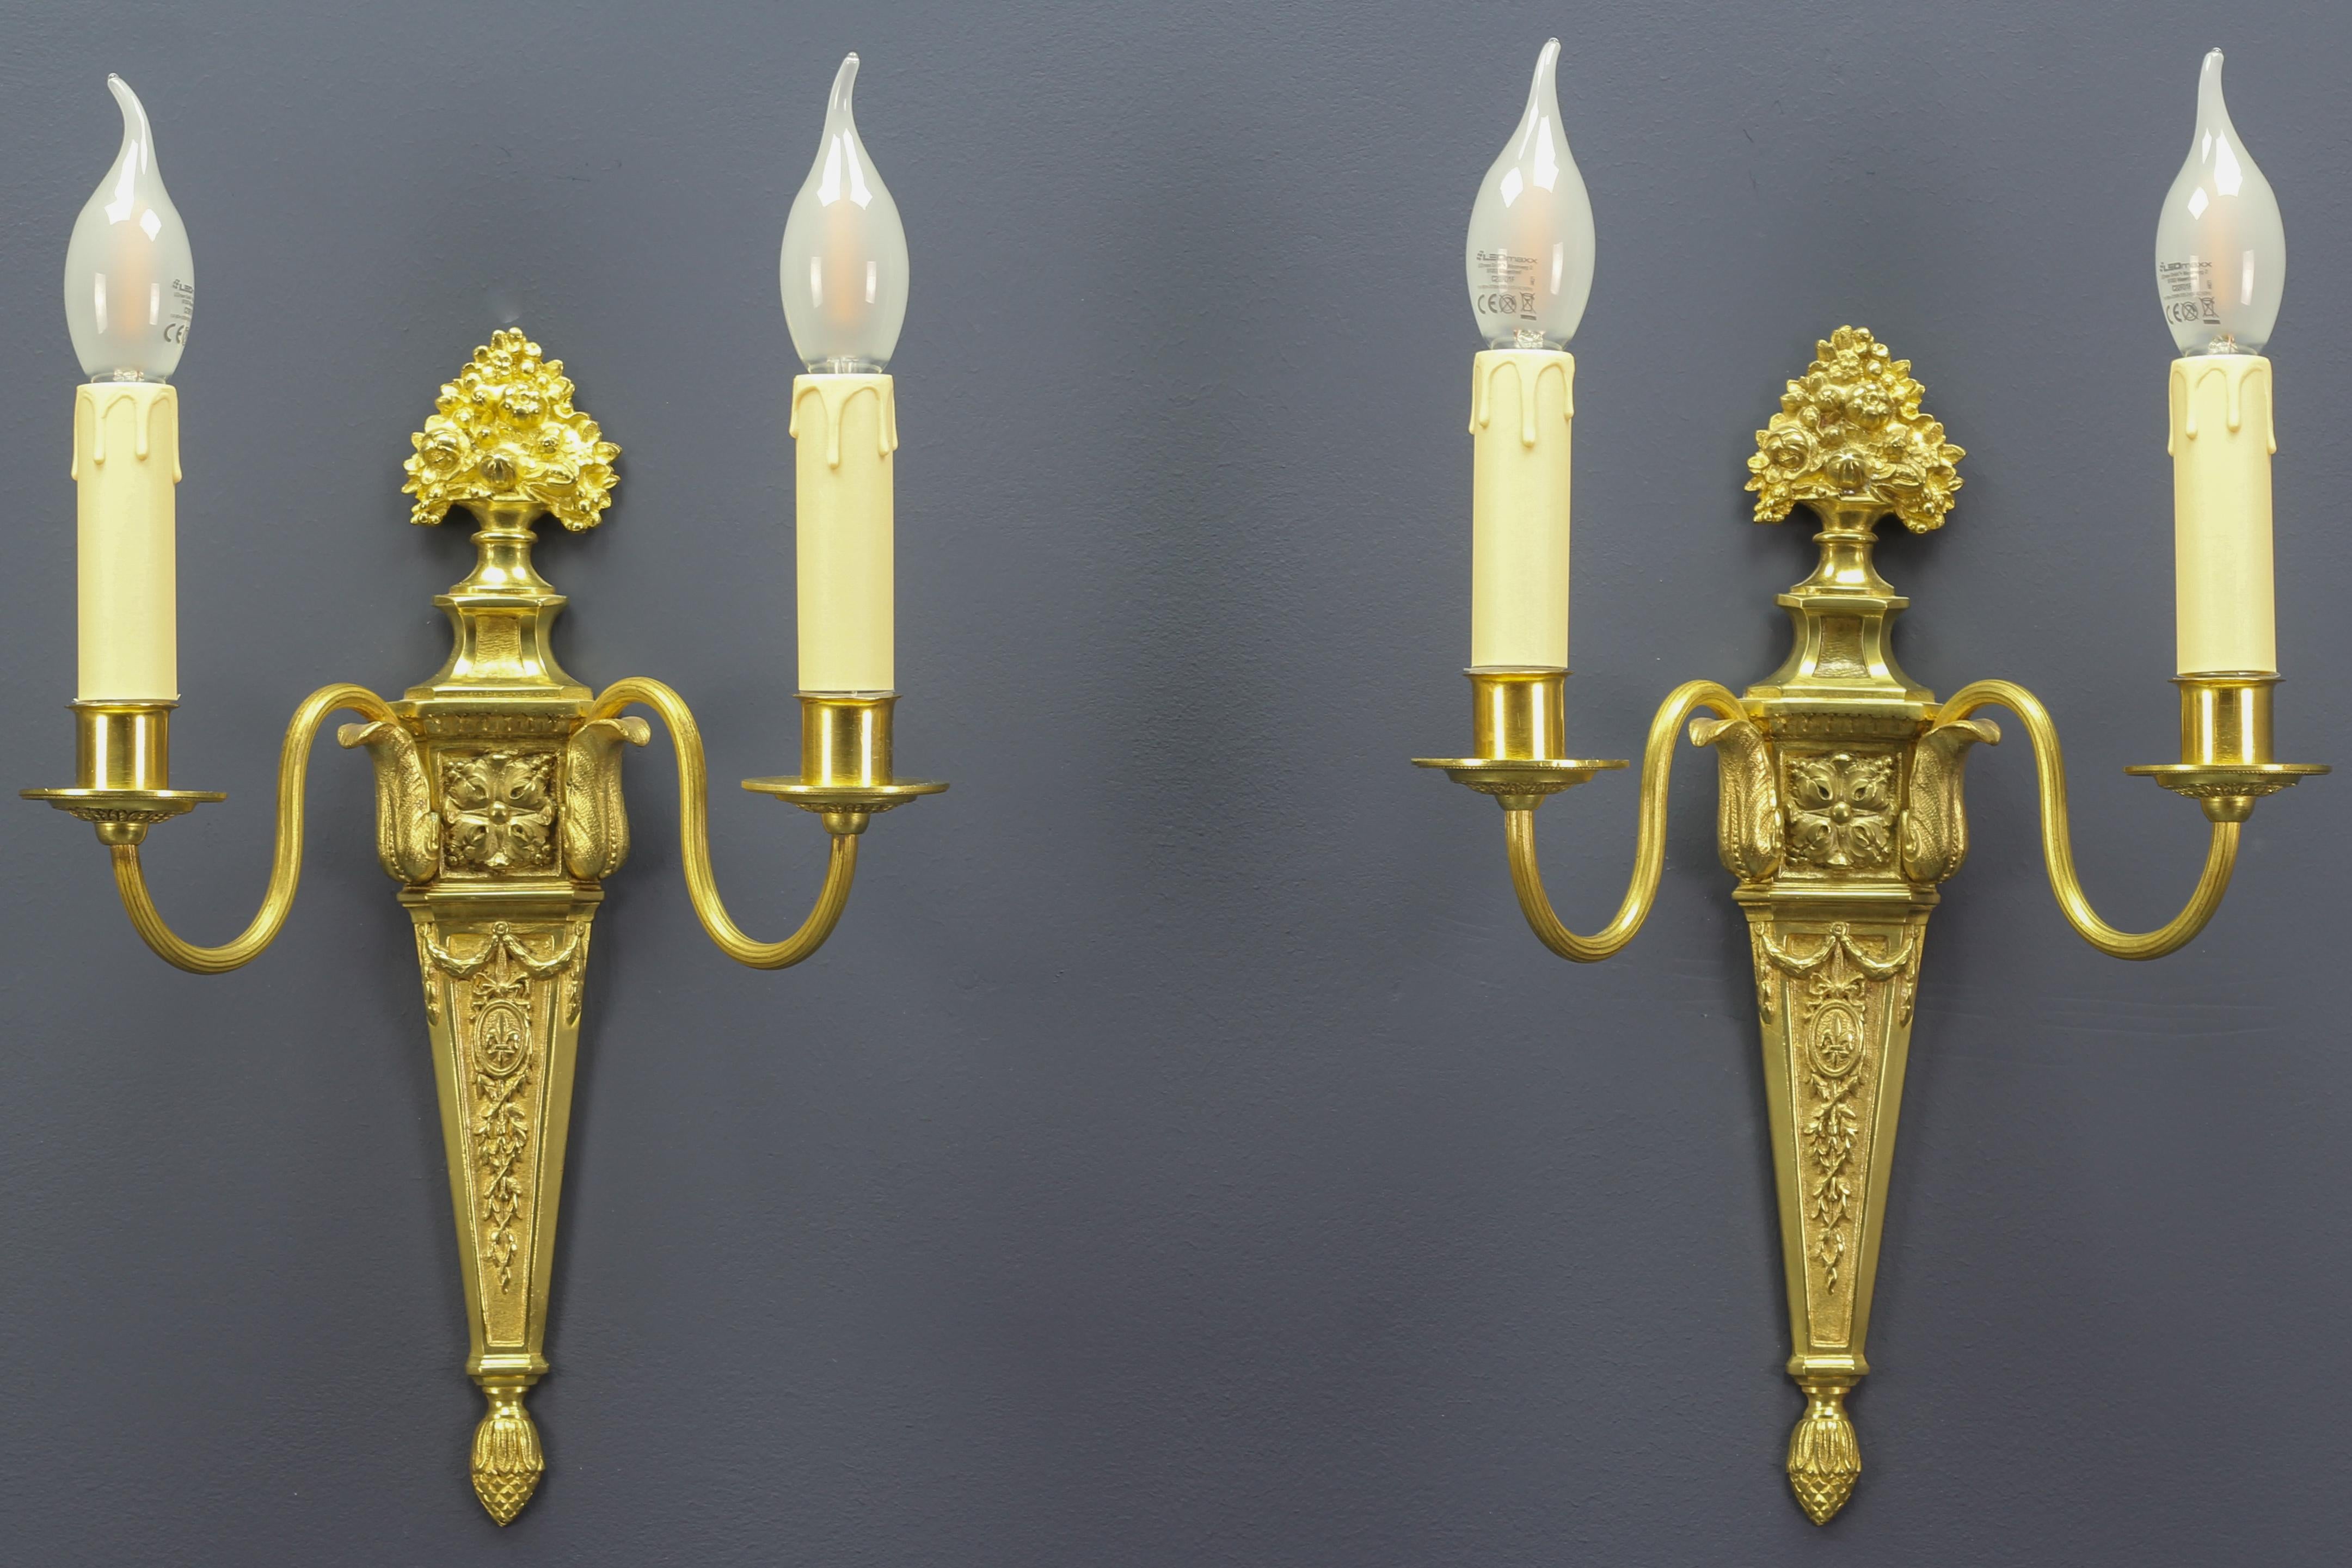 A pair of French early 20th century Louis XVI or neoclassical style gilt bronze and brass sconces. Wall lights have been electrified later. Richly decorated with bronze details, like flowers, acanthus leaves, royal French lily, fleur-de-lis, and